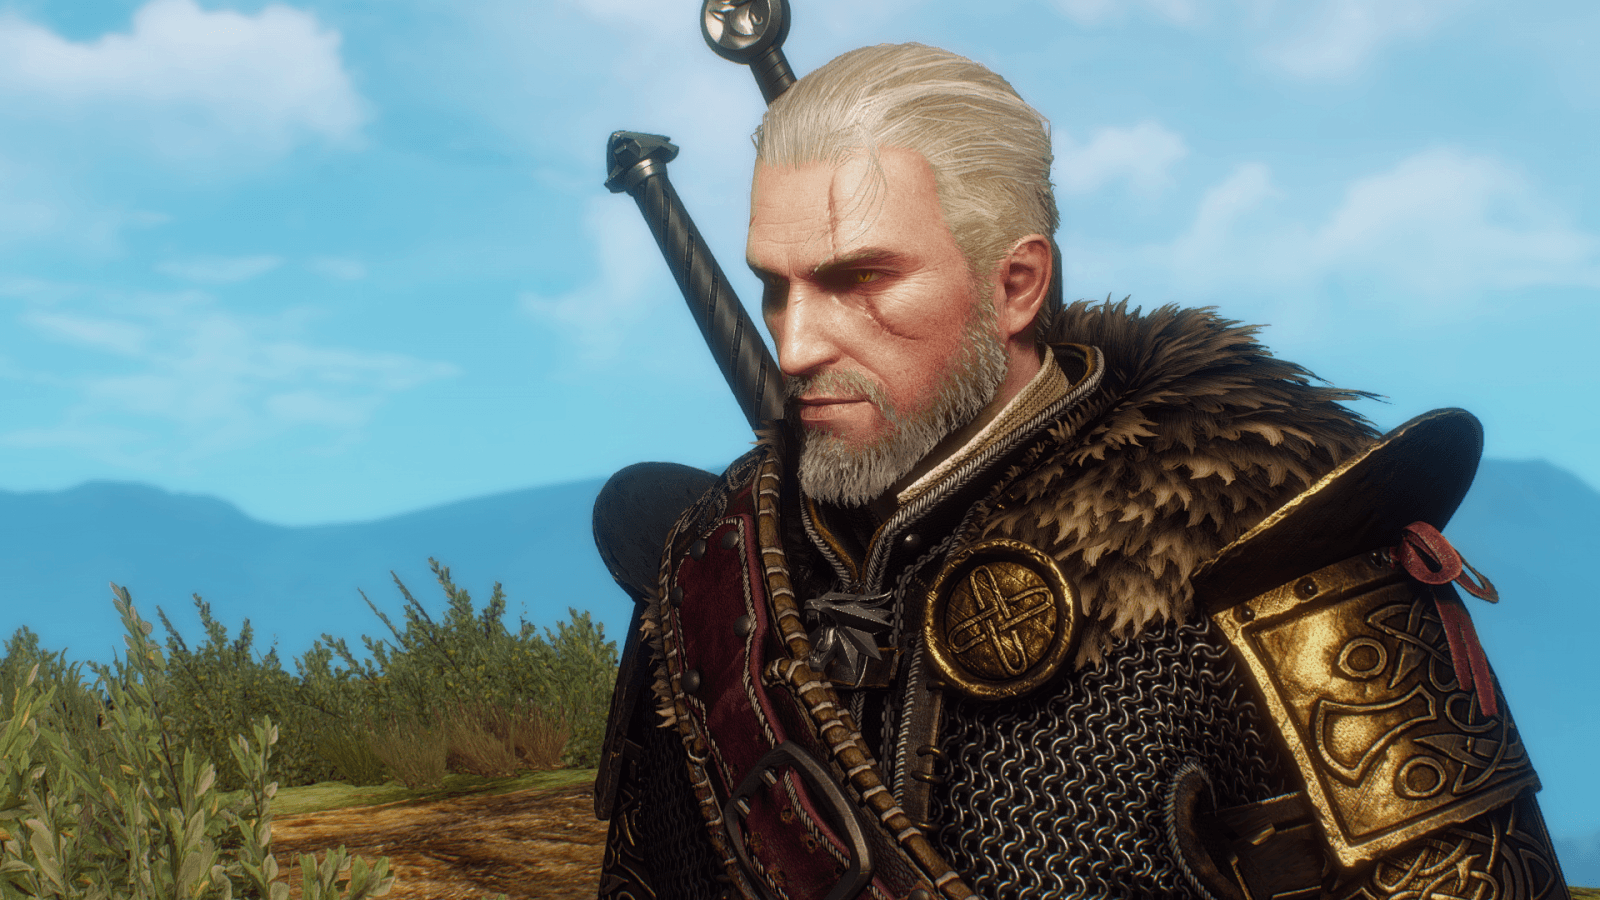 Wallpaper, The Witcher, The Witcher 3 Wild Hunt, Geralt of Rivia